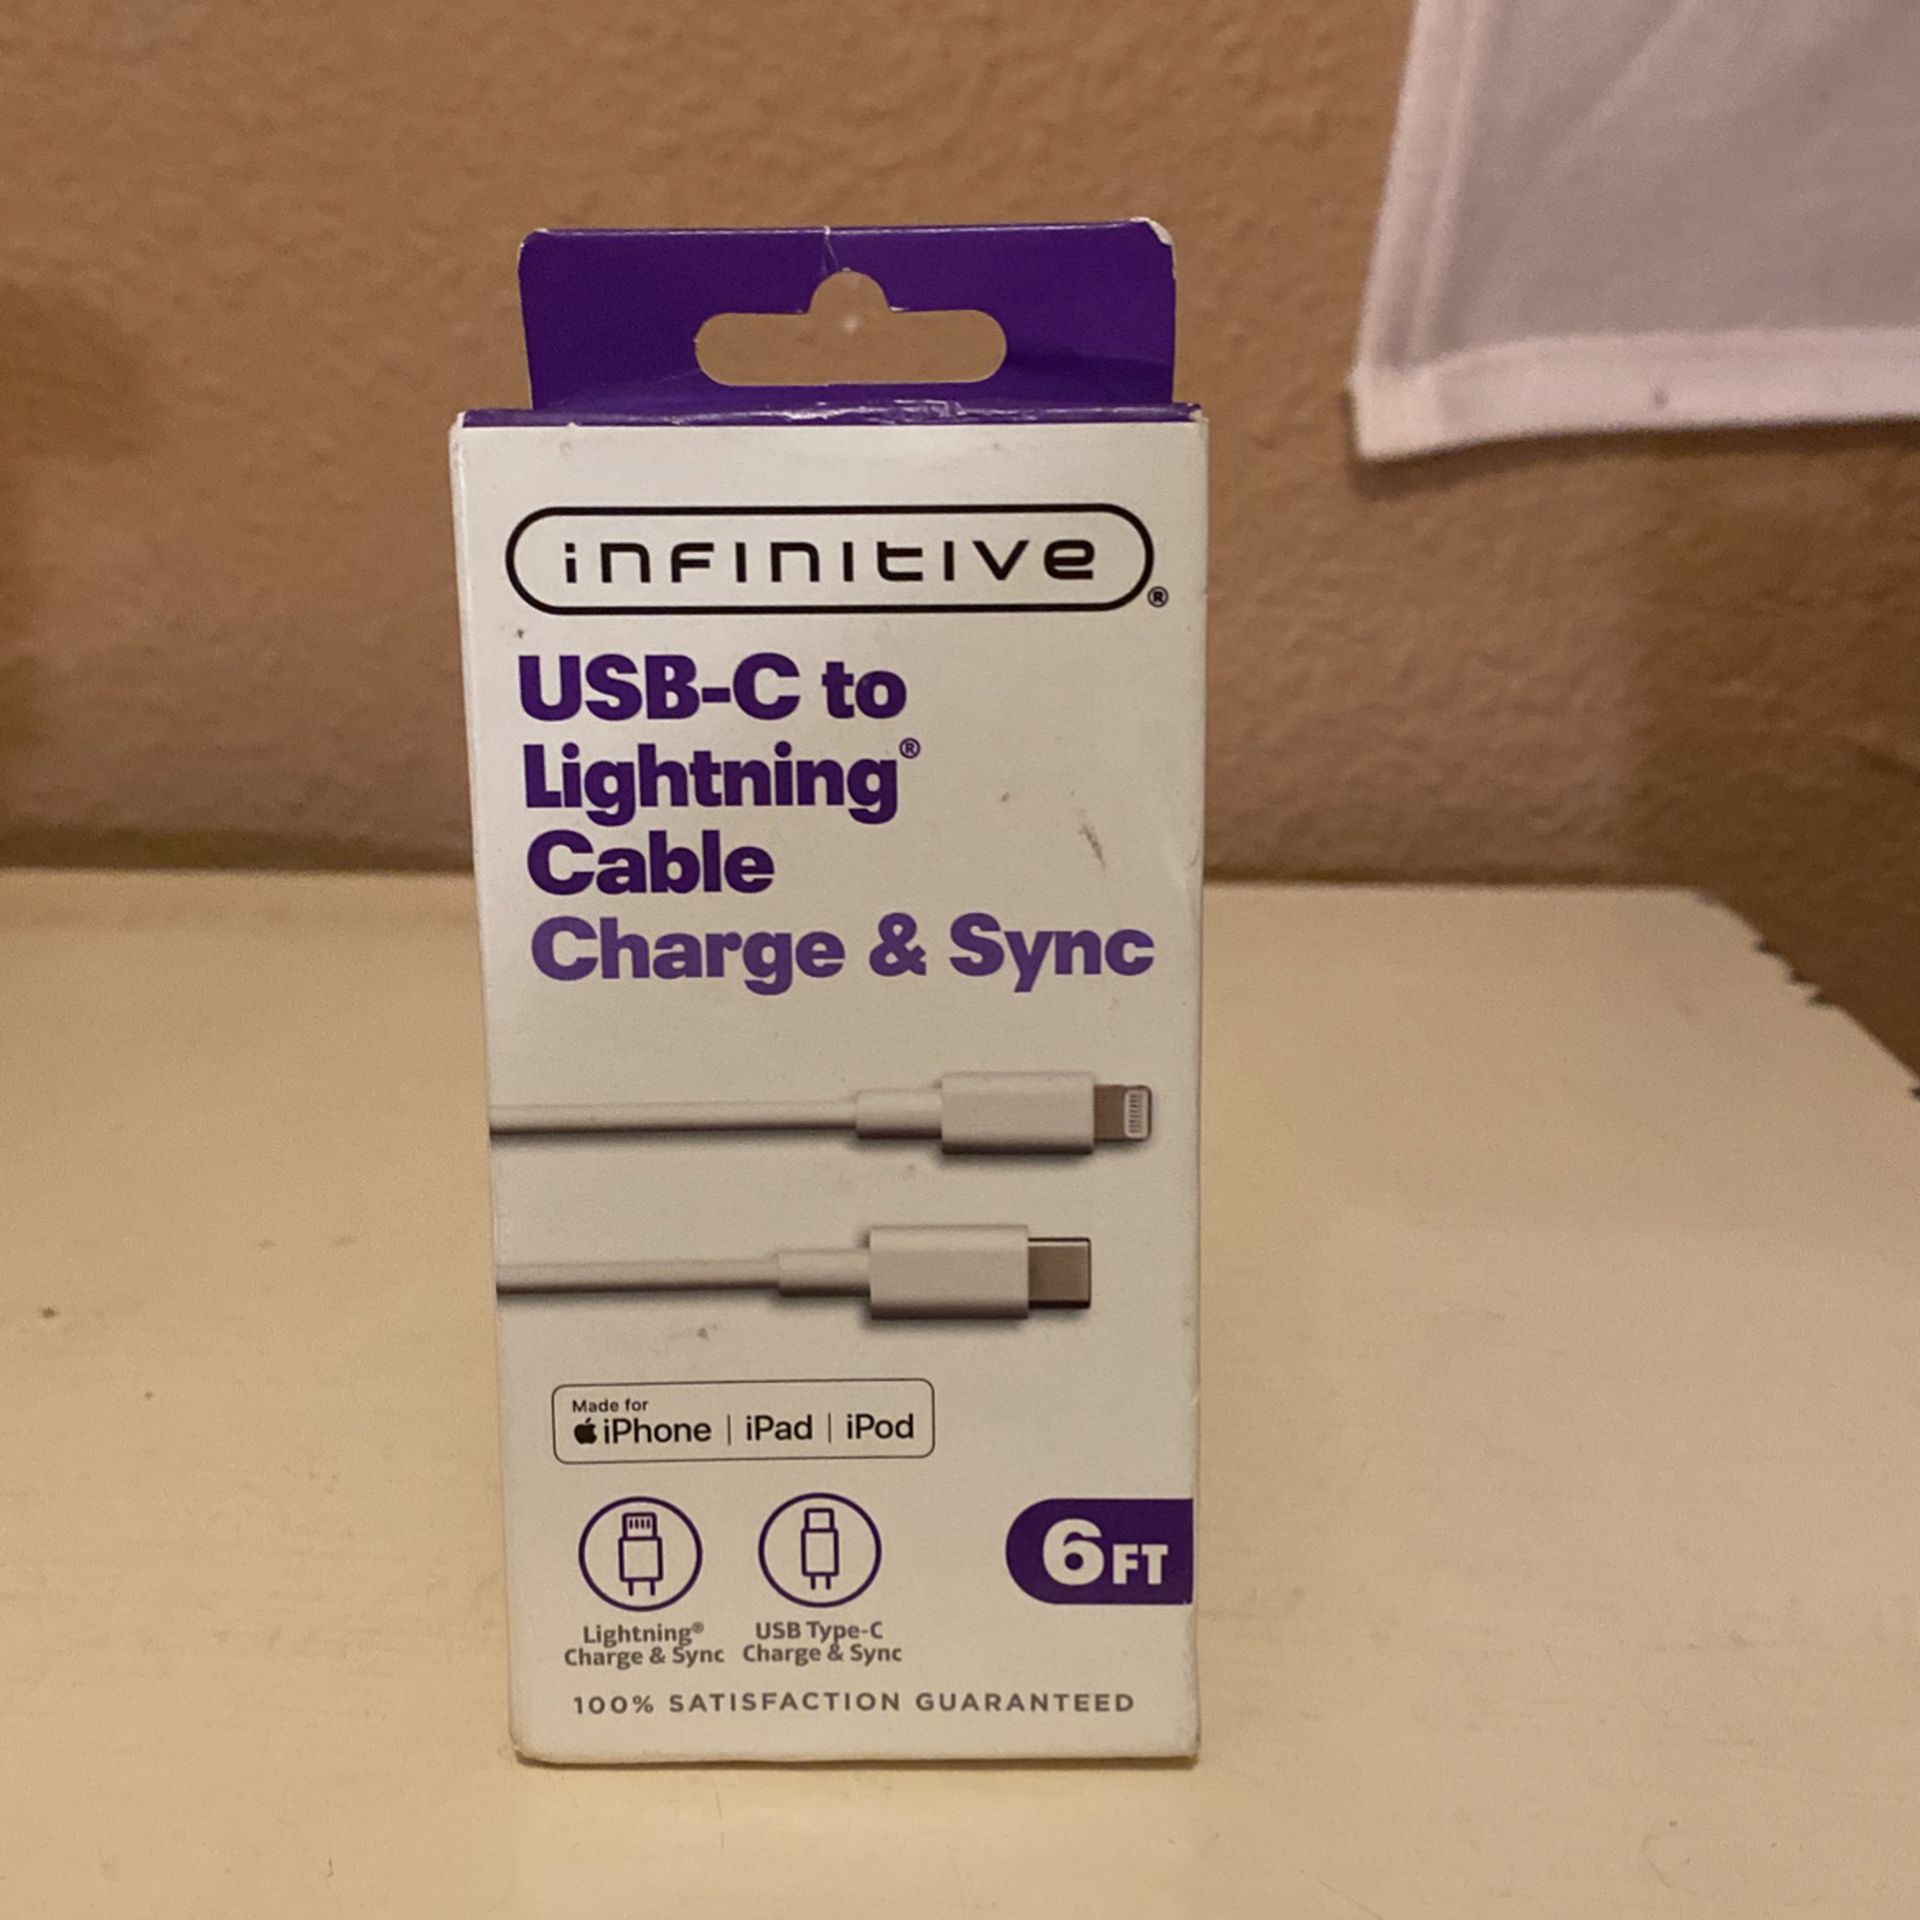 USB-c To Lightning Cable Charge And Sync 6 Ft For iPhone iPad iPod $6 C My Page Great Items Ty